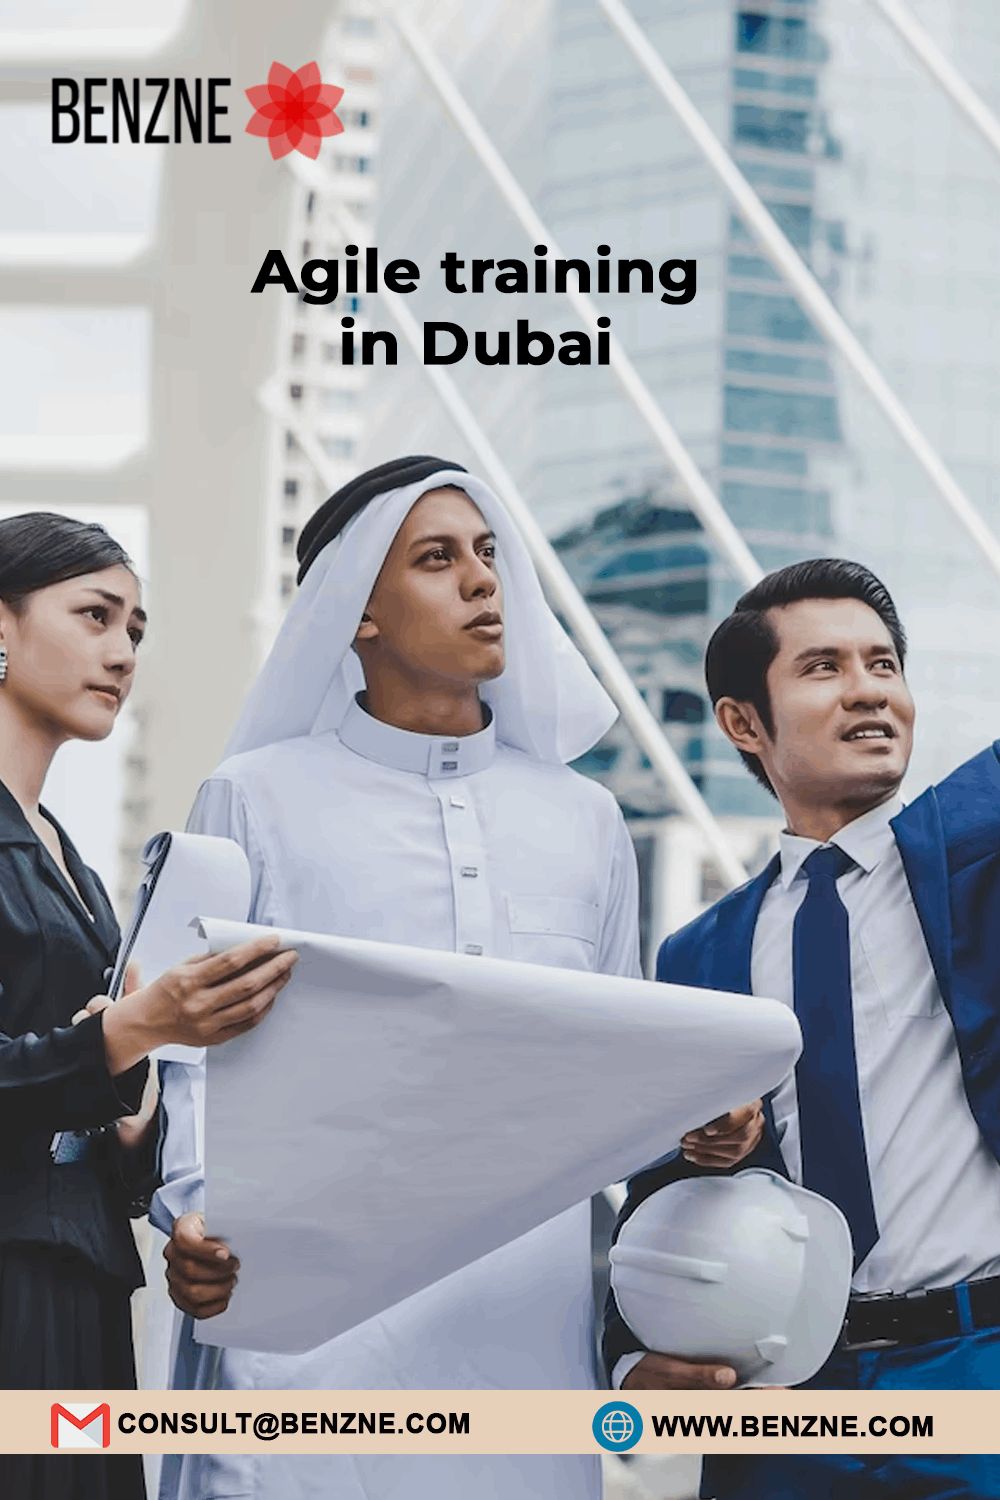 Connect With Benzne Agile Training In Dubai To Know Agile In A Better Manner